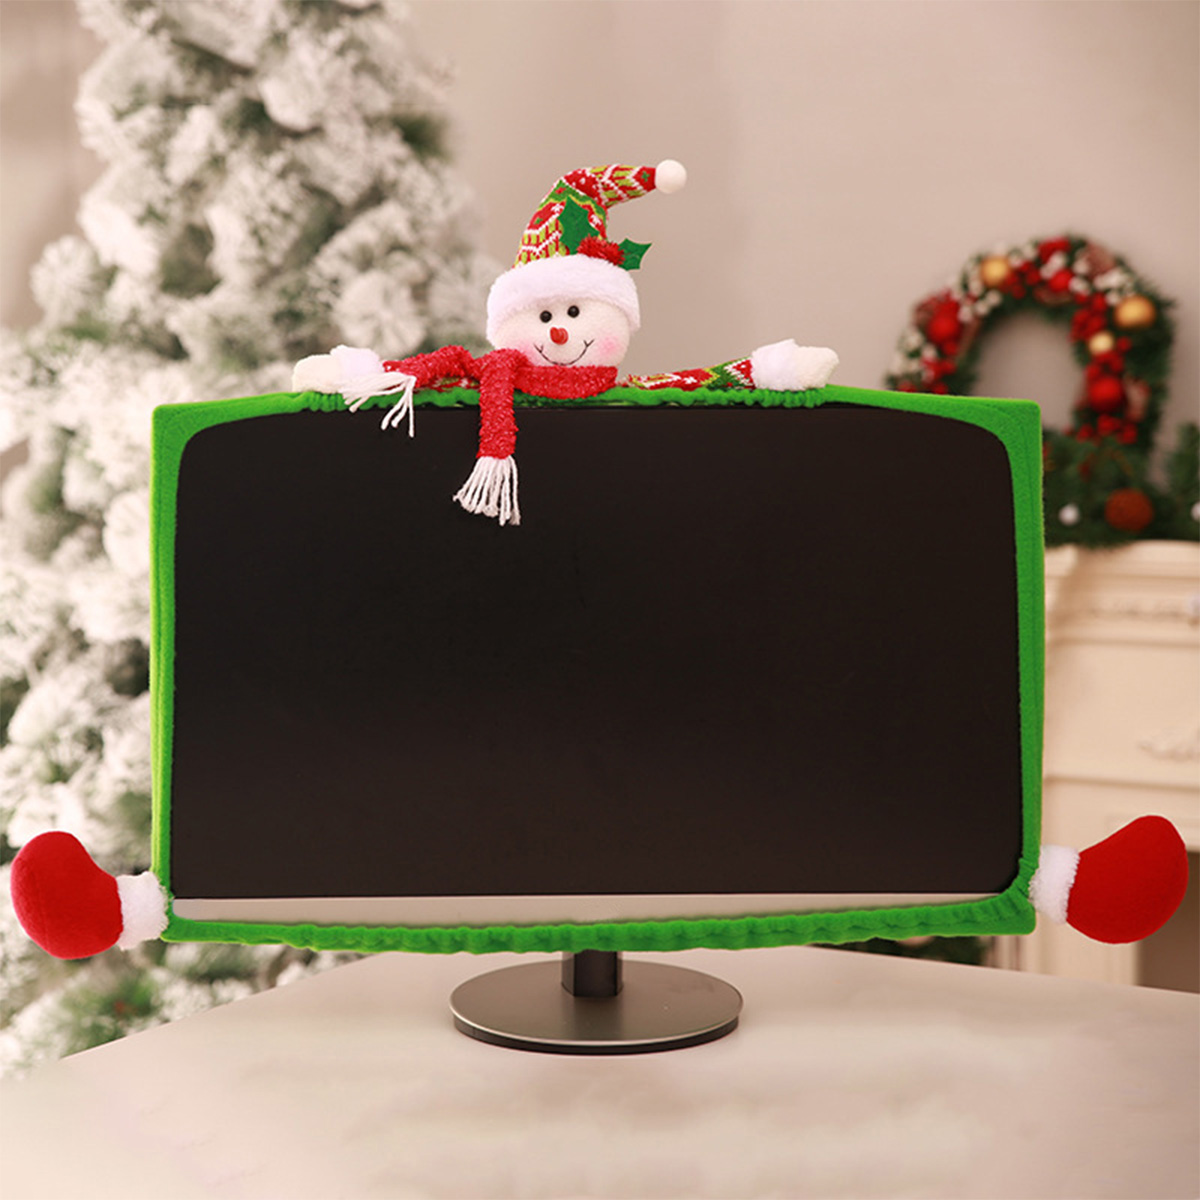 3-Style-Christmas-Computer-Laptop-LCD-Screen-Monitor-Decor-Cover-Suit-19-27quot-1376081-4